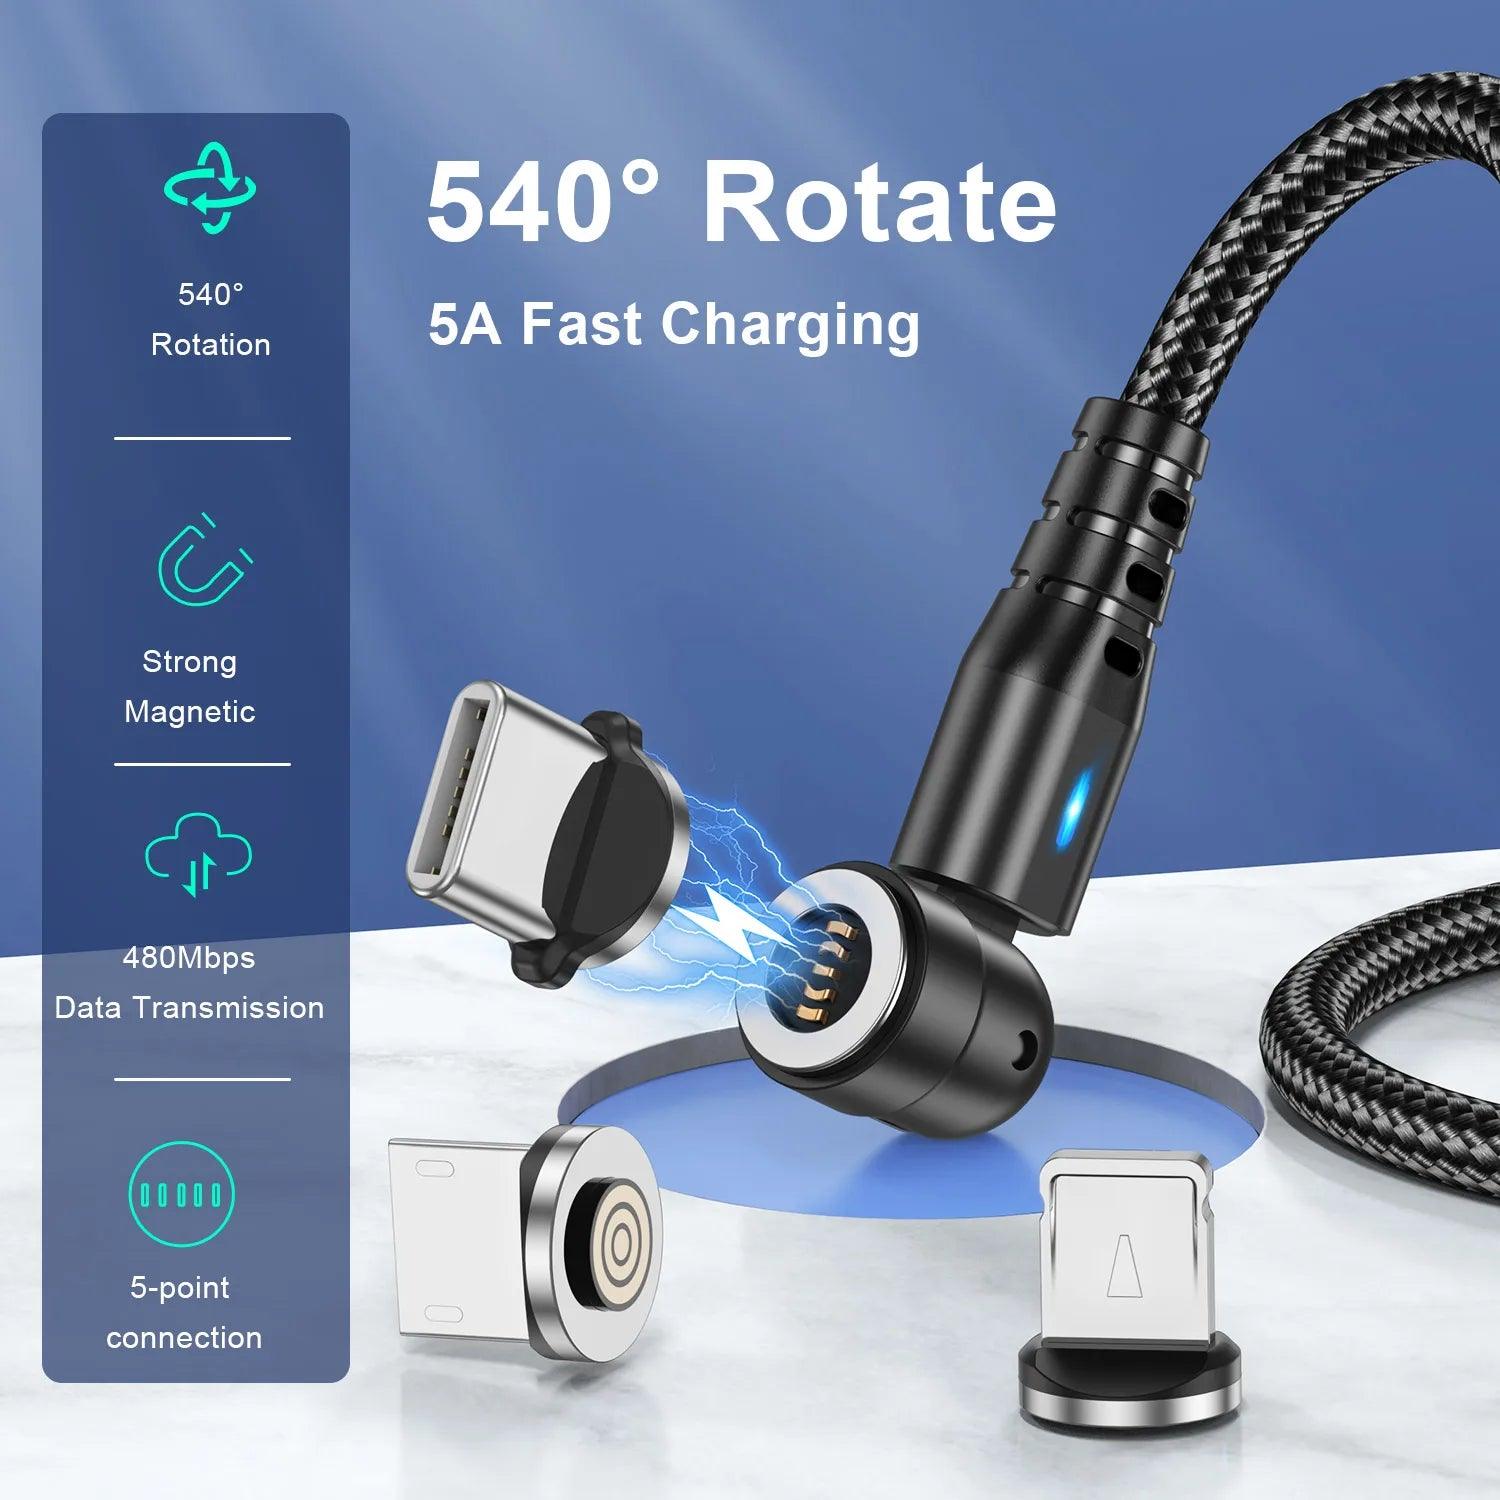 Magnetic 540° Rotation 5A Fast Charging Cable for iPhone Xiaomi - USB Type C & Micro USB Compatible  ourlum.com   